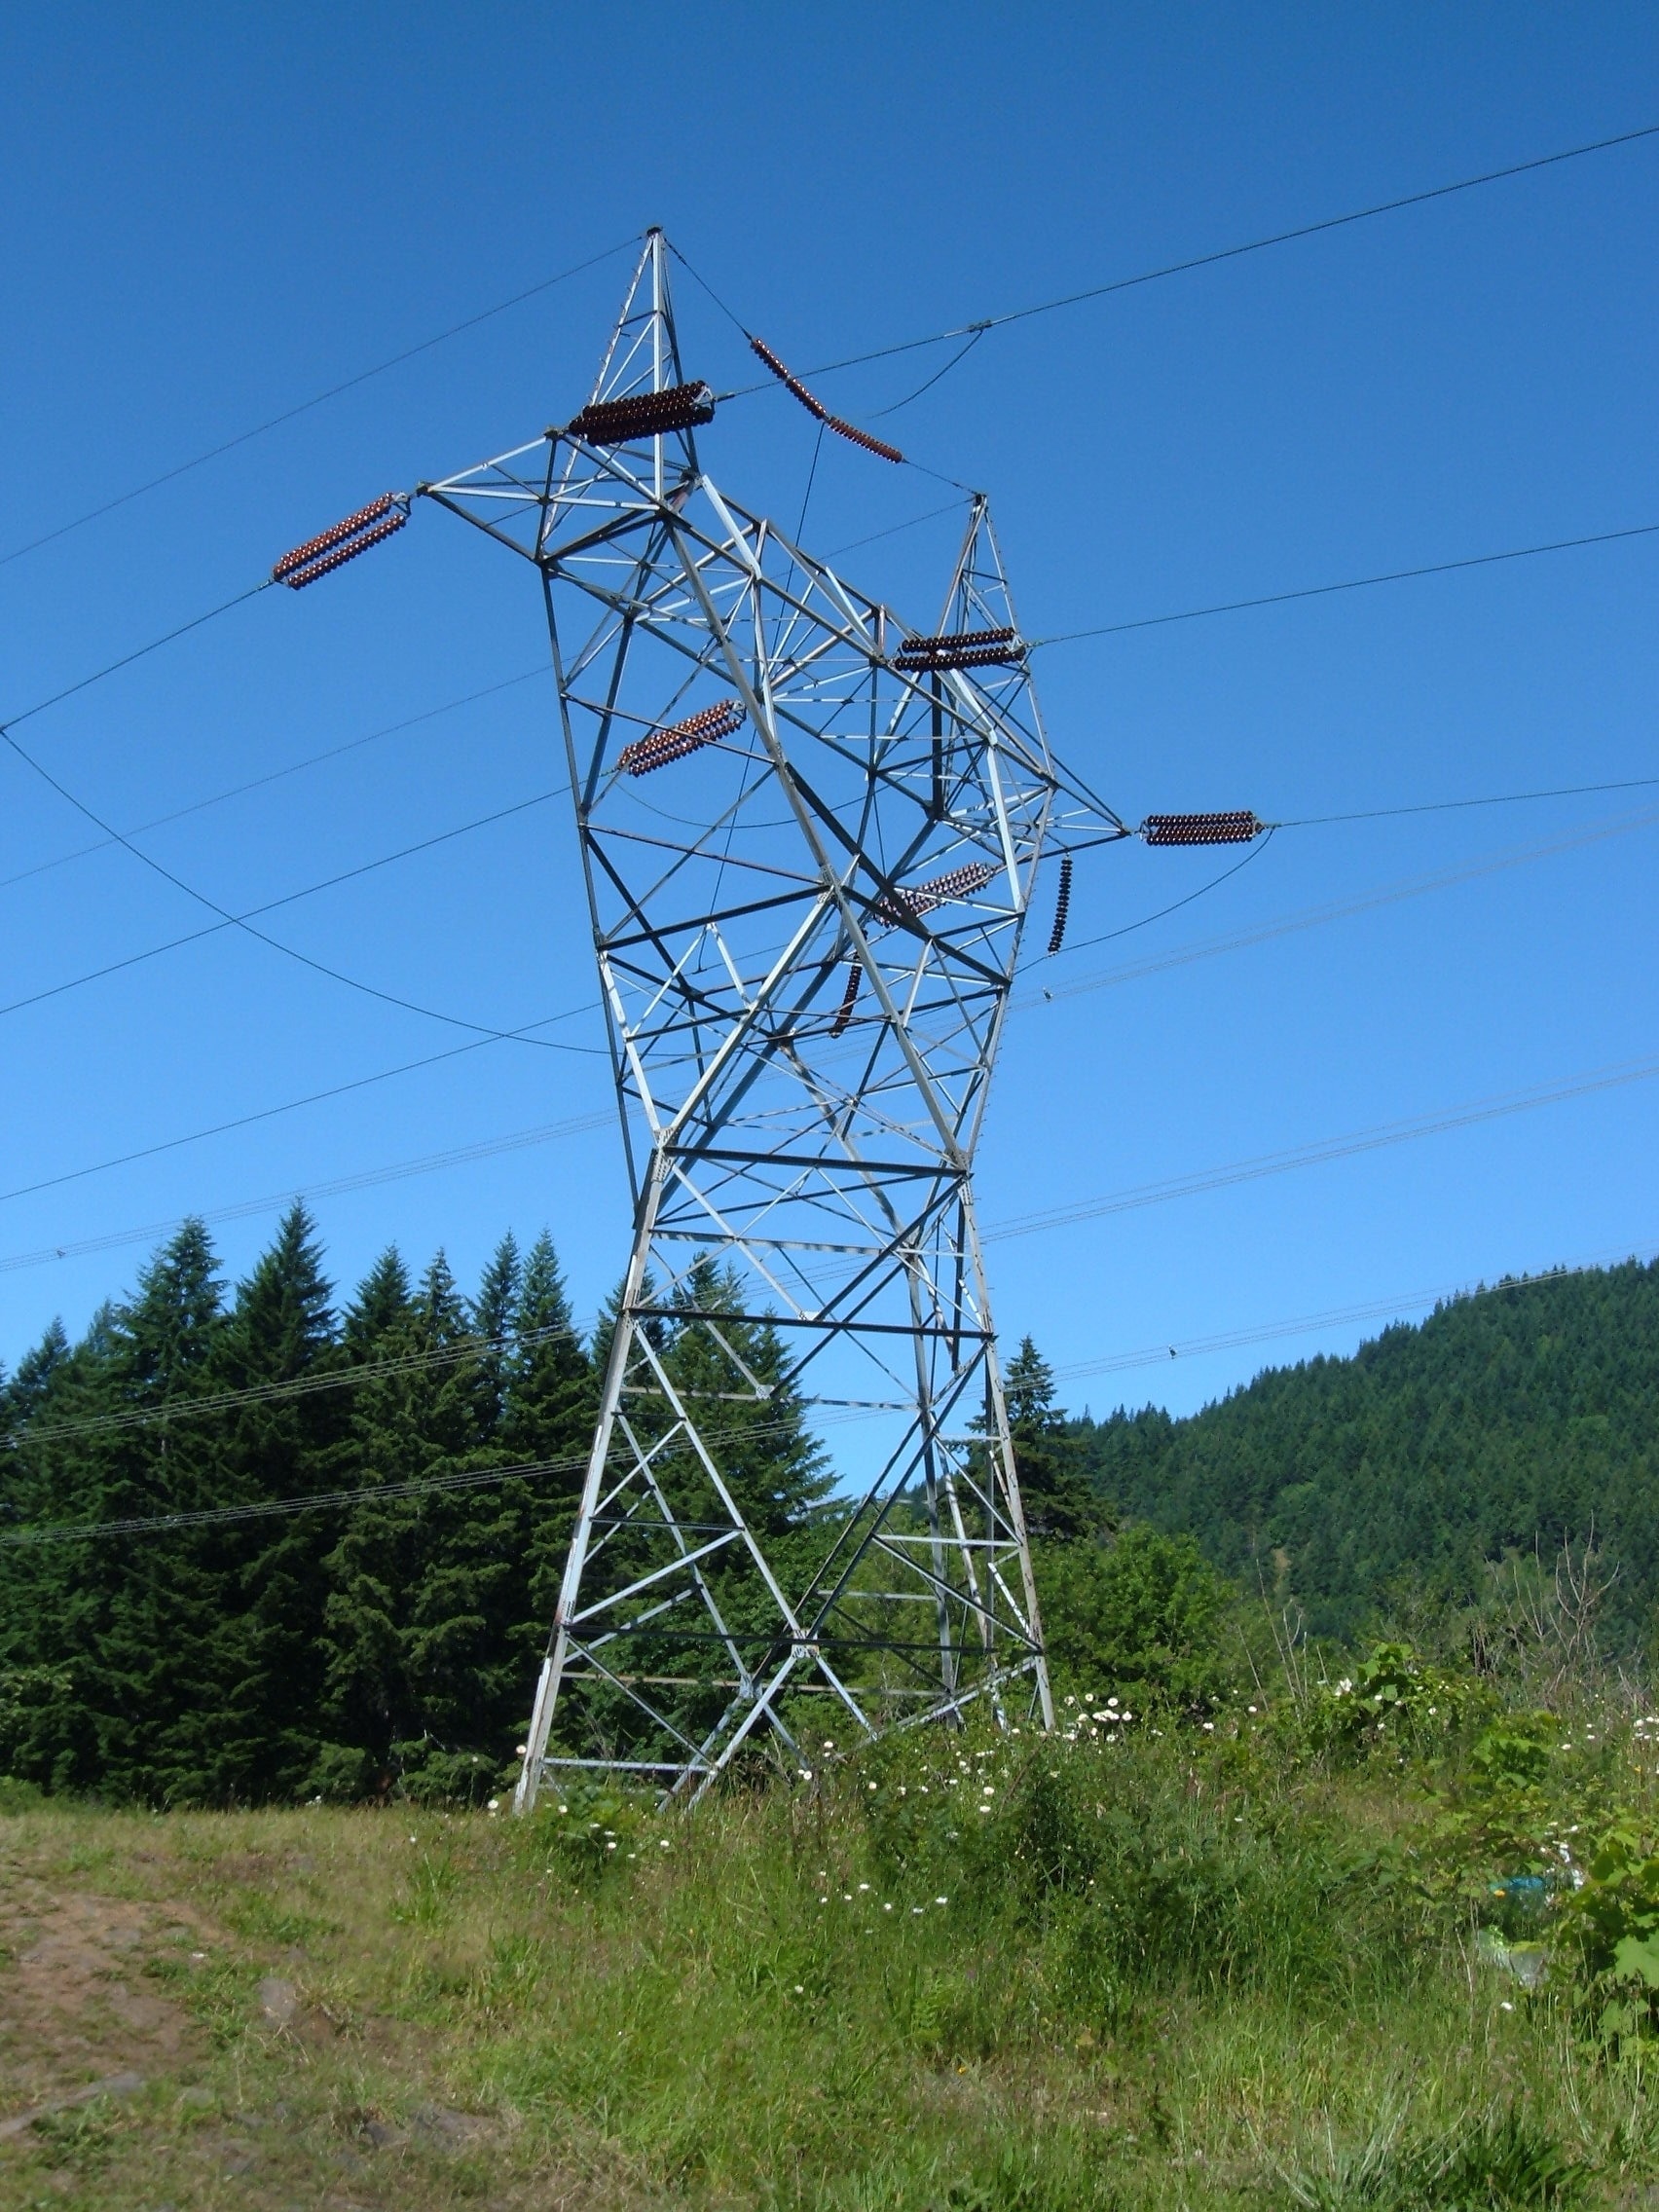 gray metal electricity tower on field near trees